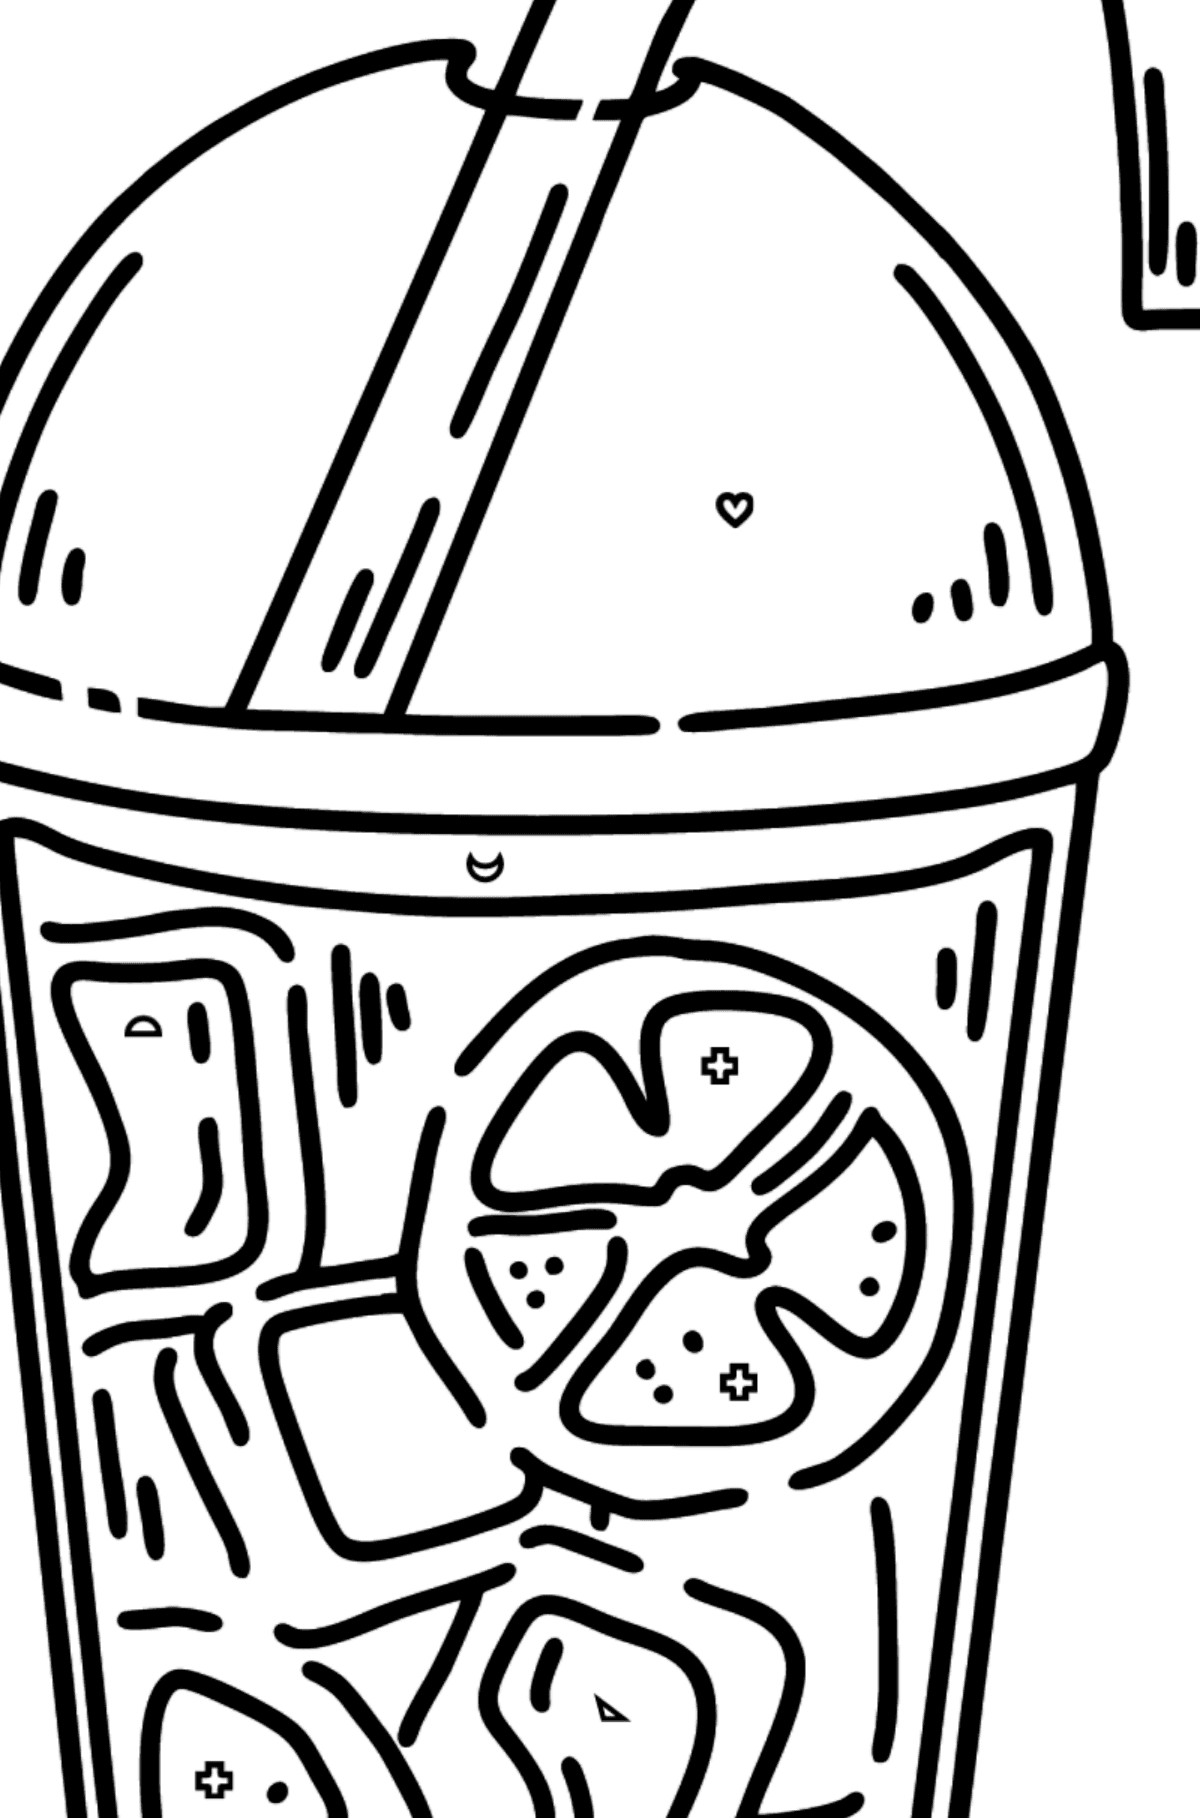 Lemonade in a Glass coloring page - Coloring by Geometric Shapes for Kids